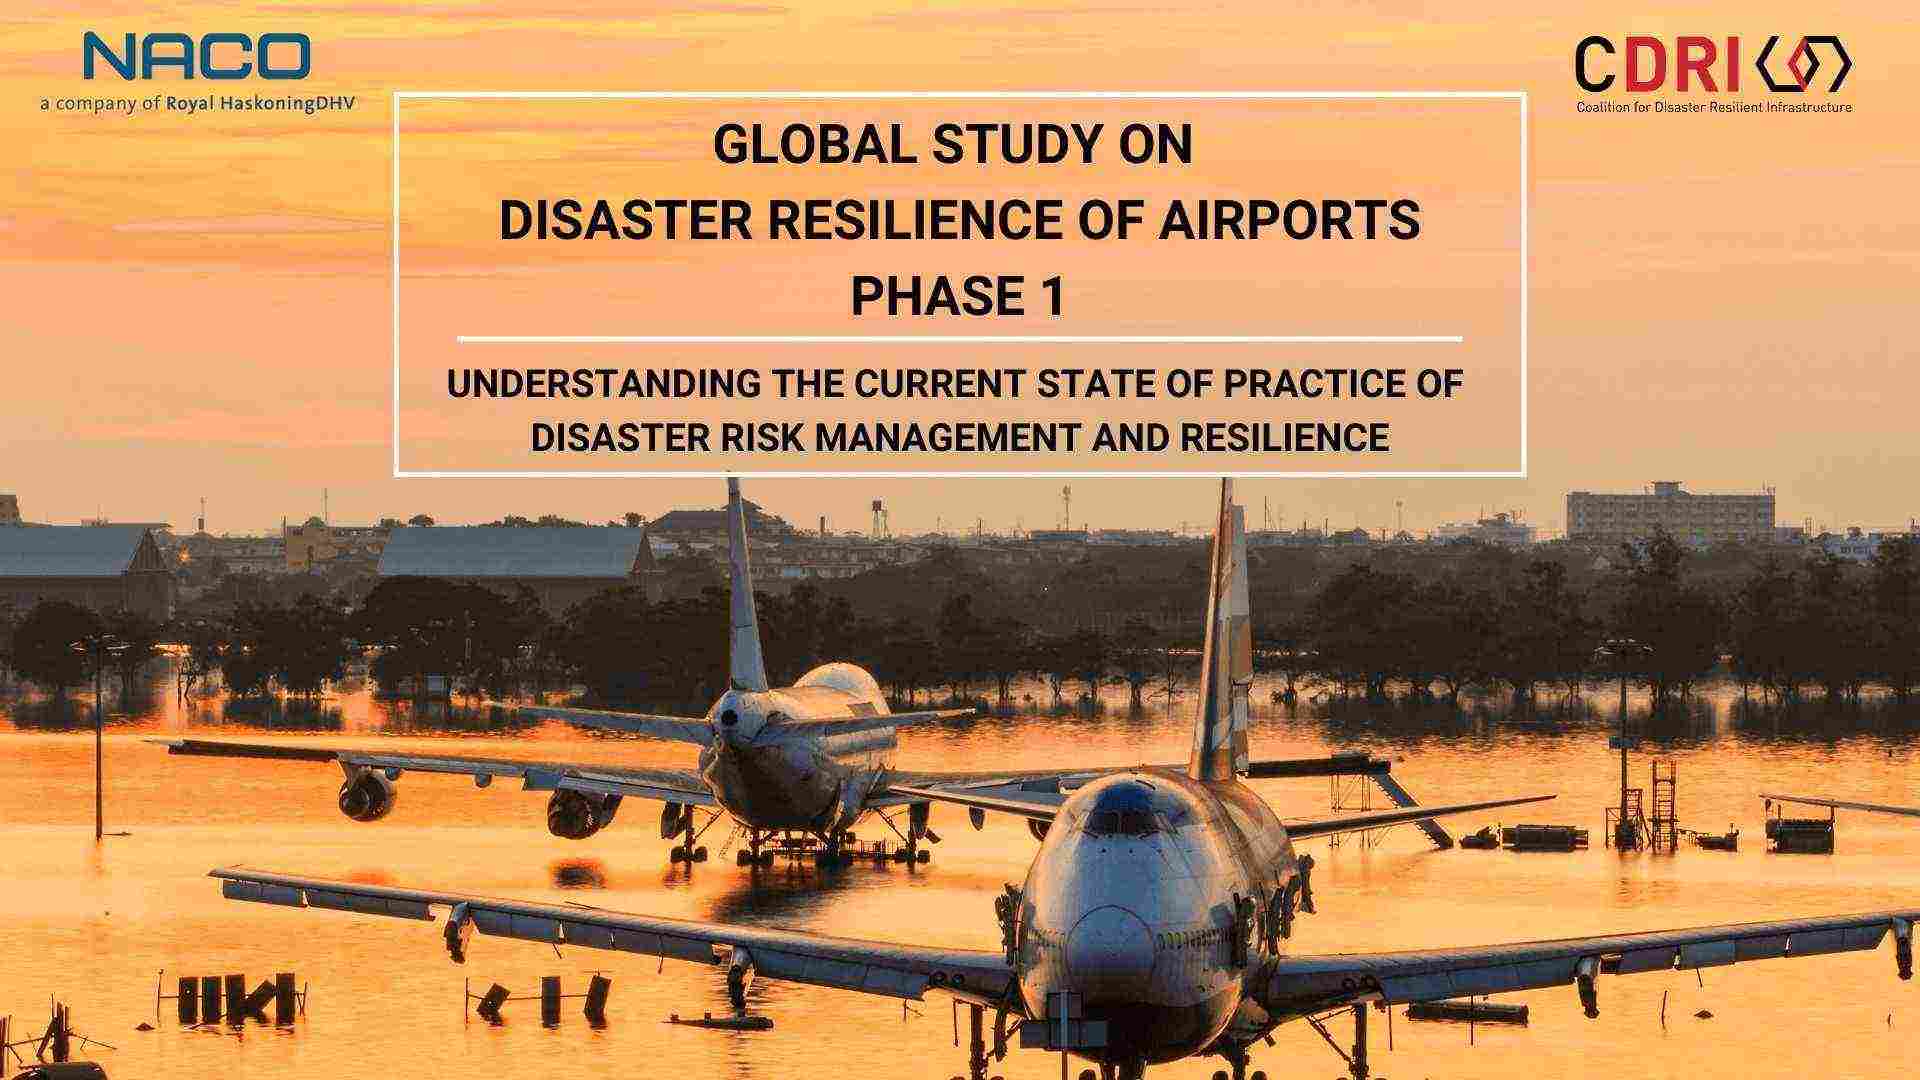 Global Study on Disaster Resilience of Airports Phase 1